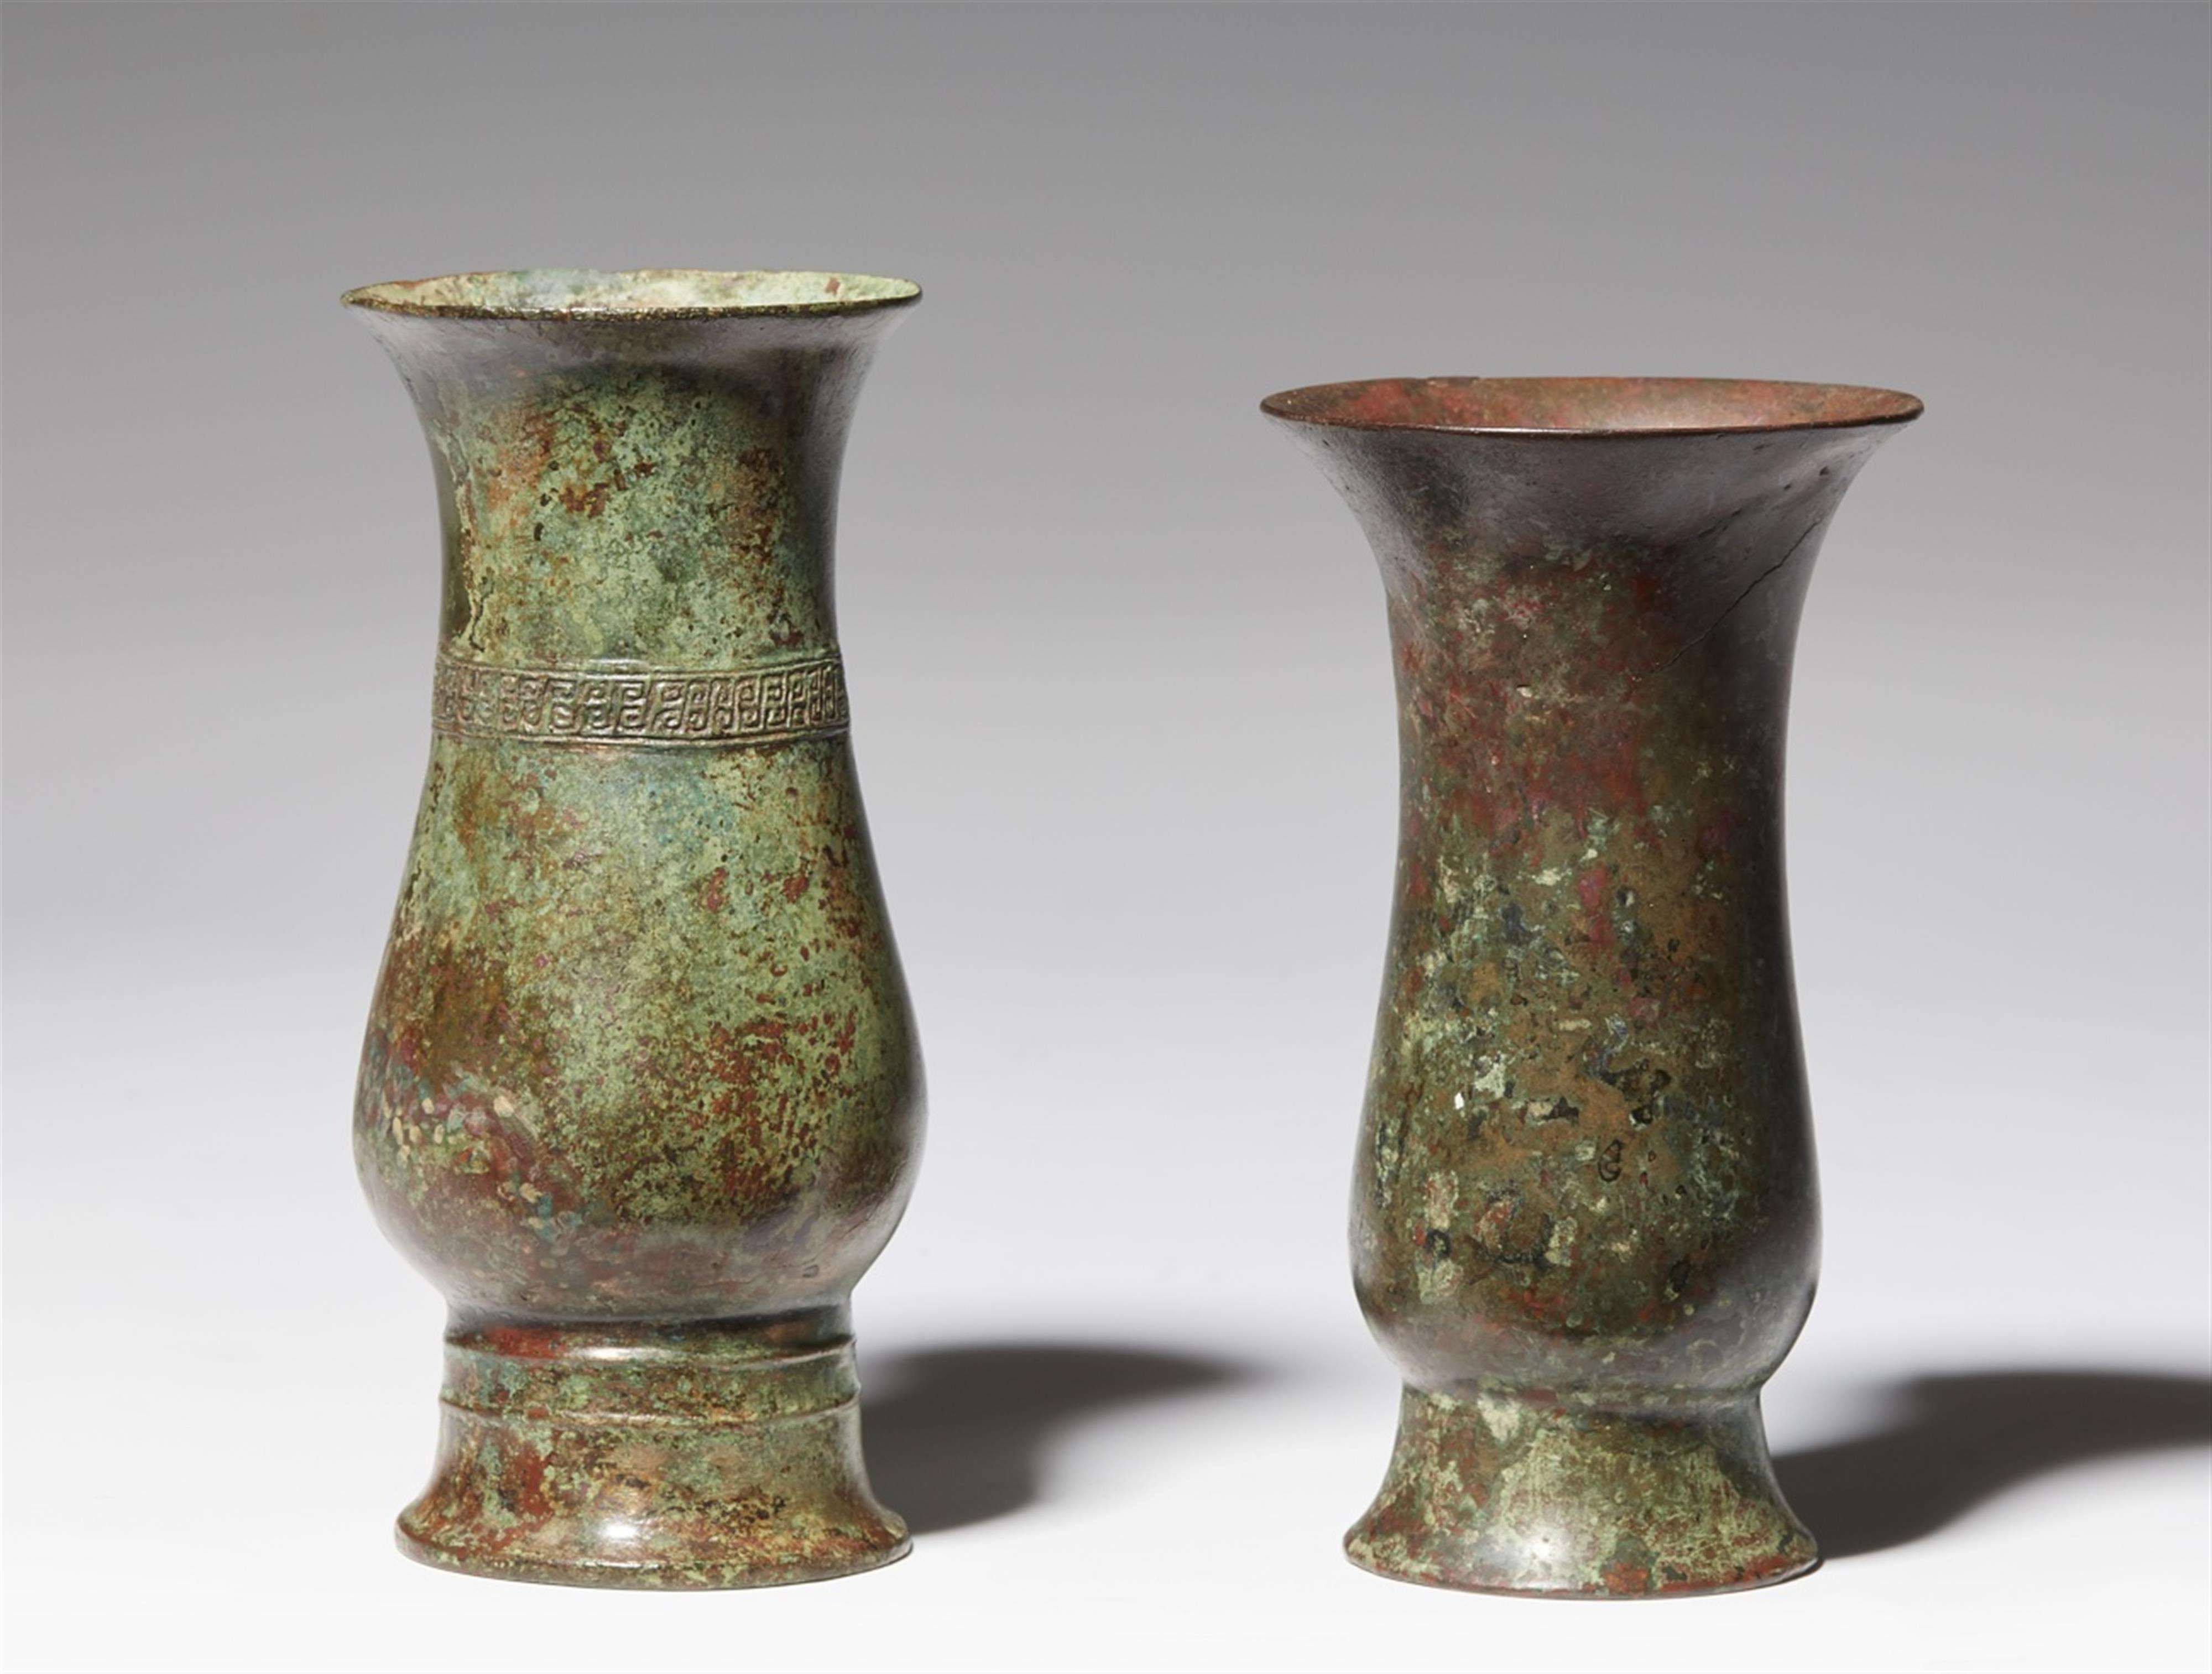 Two small bronze drinking vessels. Early Western Zhou dynasty, ca. 11./10. Jh. v. Chr. - image-1